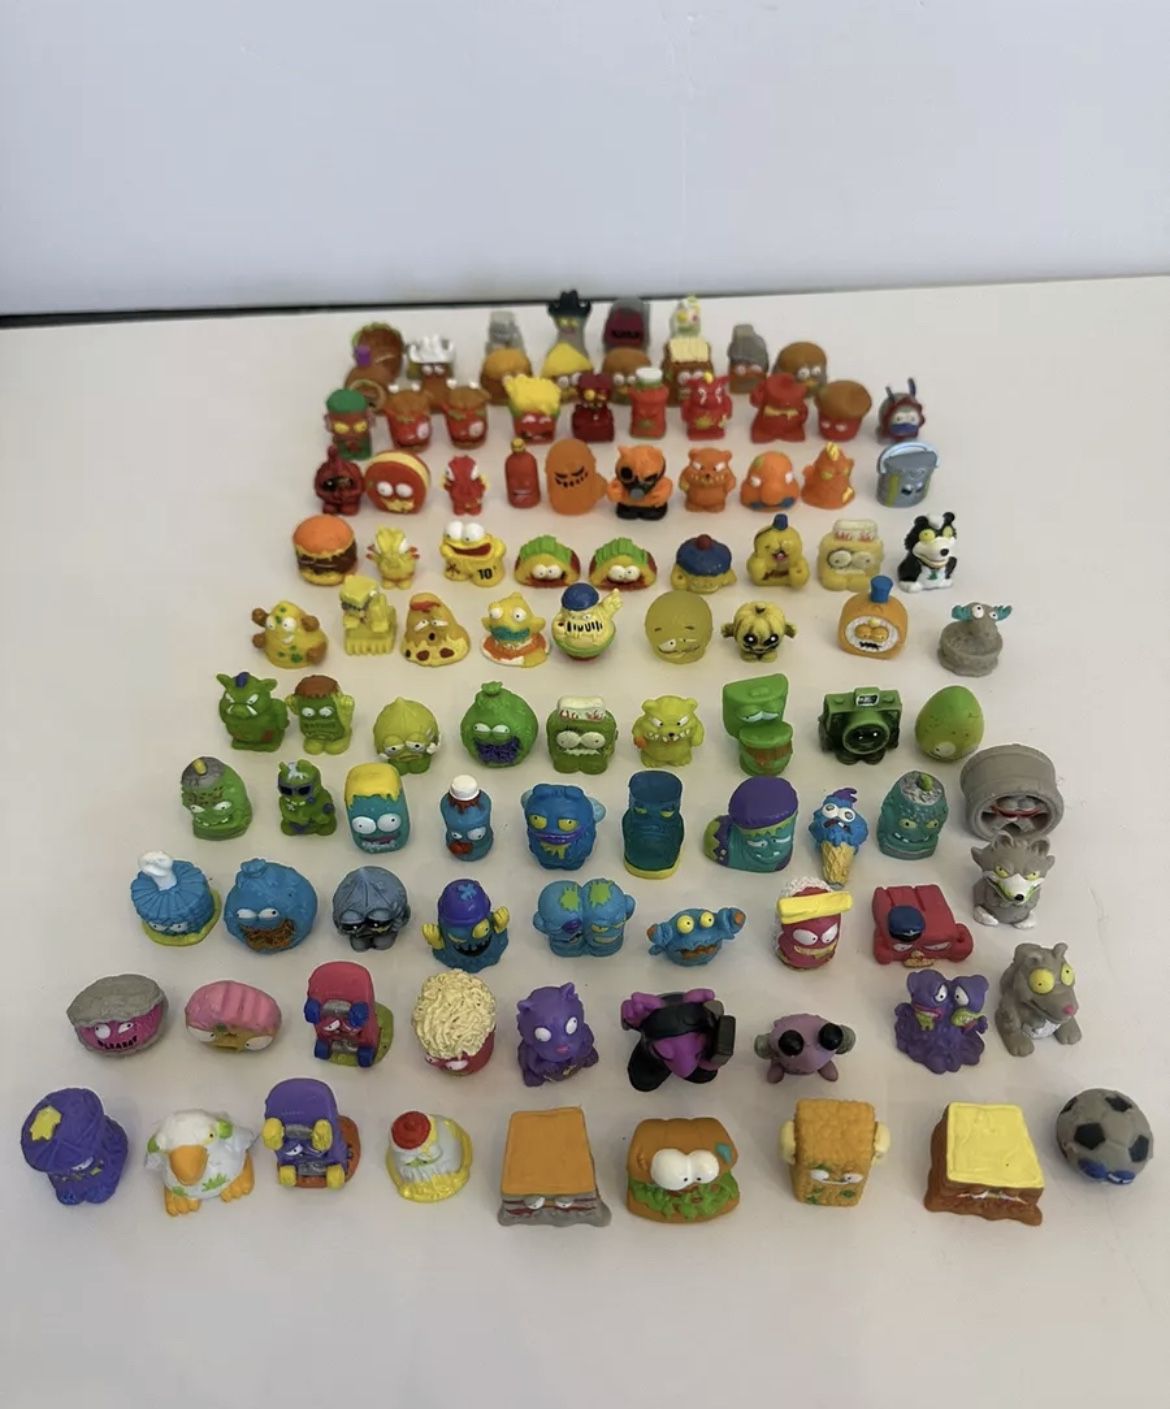 Huge Lot of The Grossery Gang Trash Pack Moose Huge Mixed Series OVER 80 PIECES